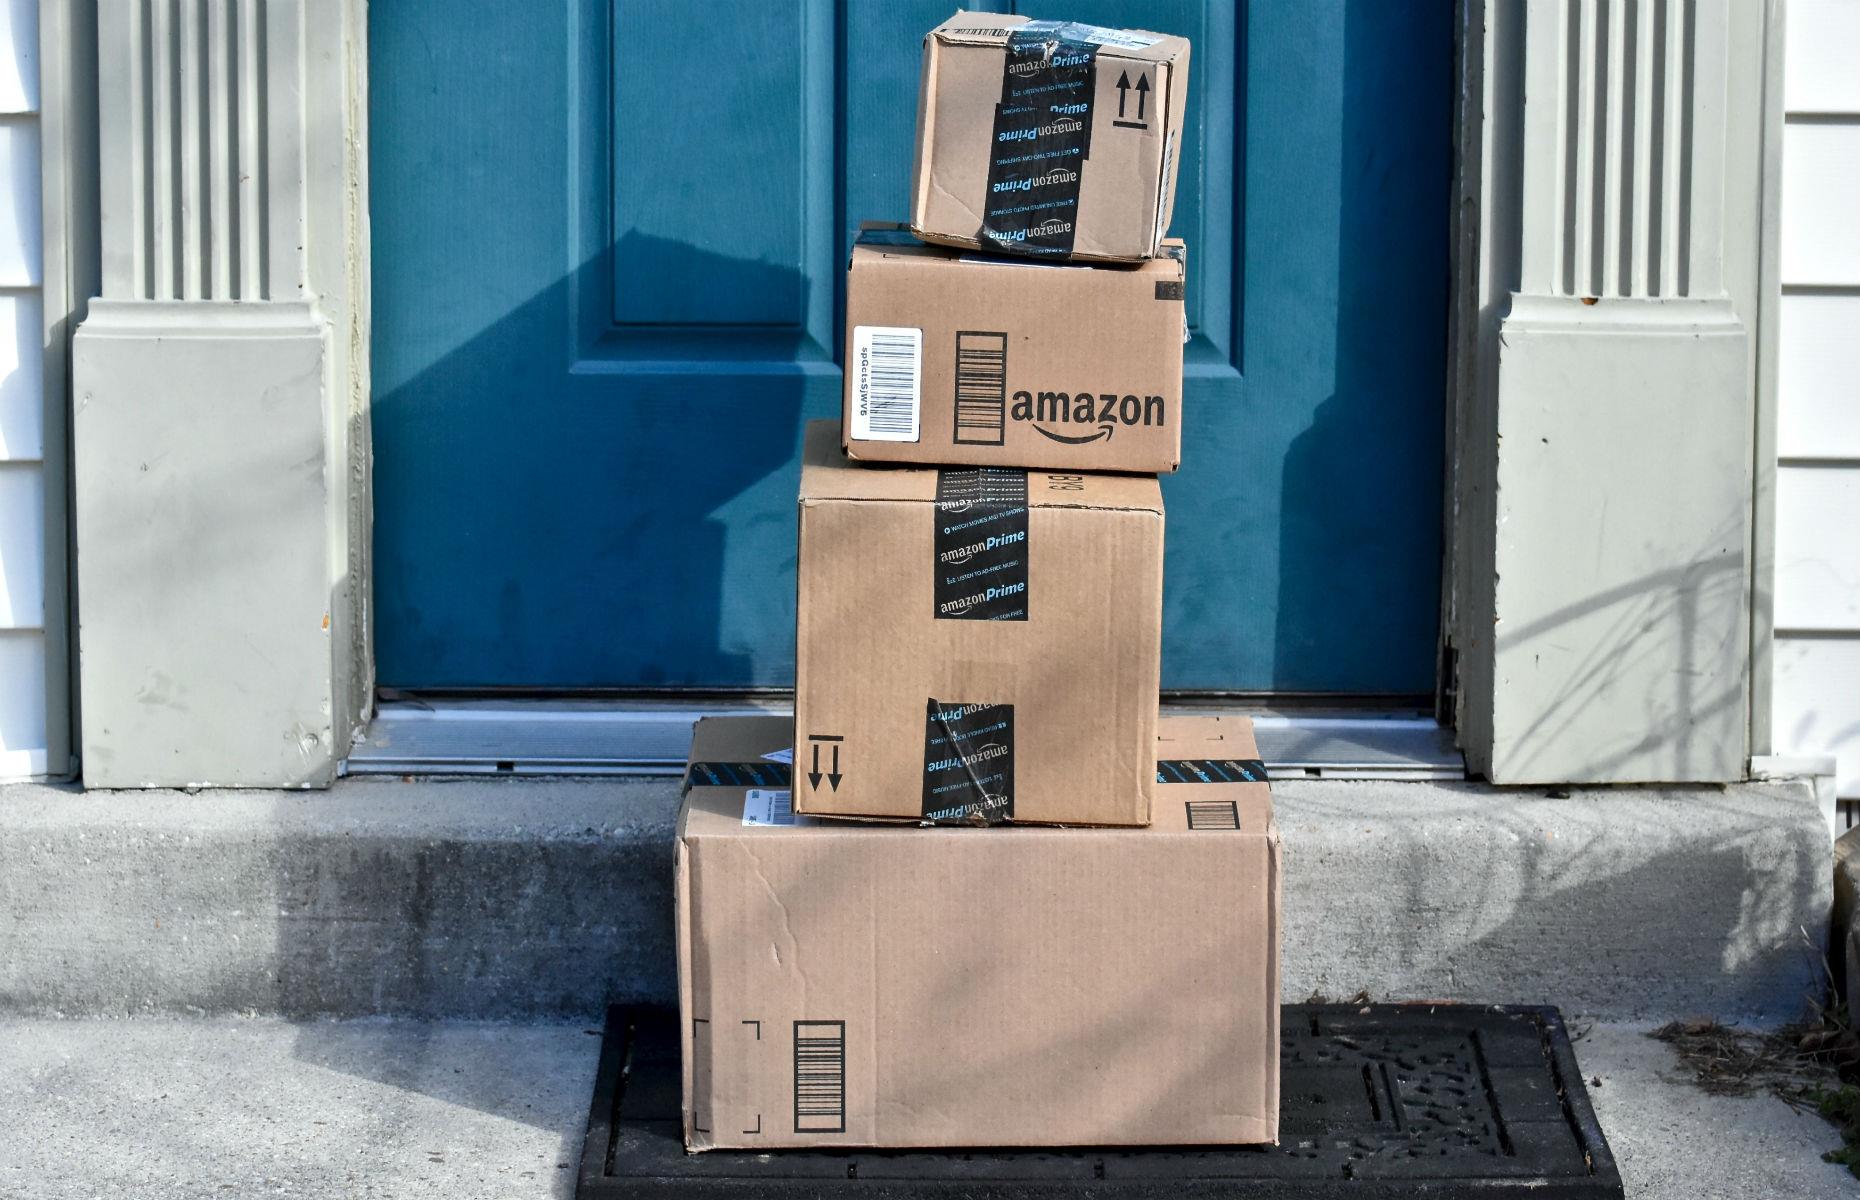 Amazon Prime Day – typically June or July